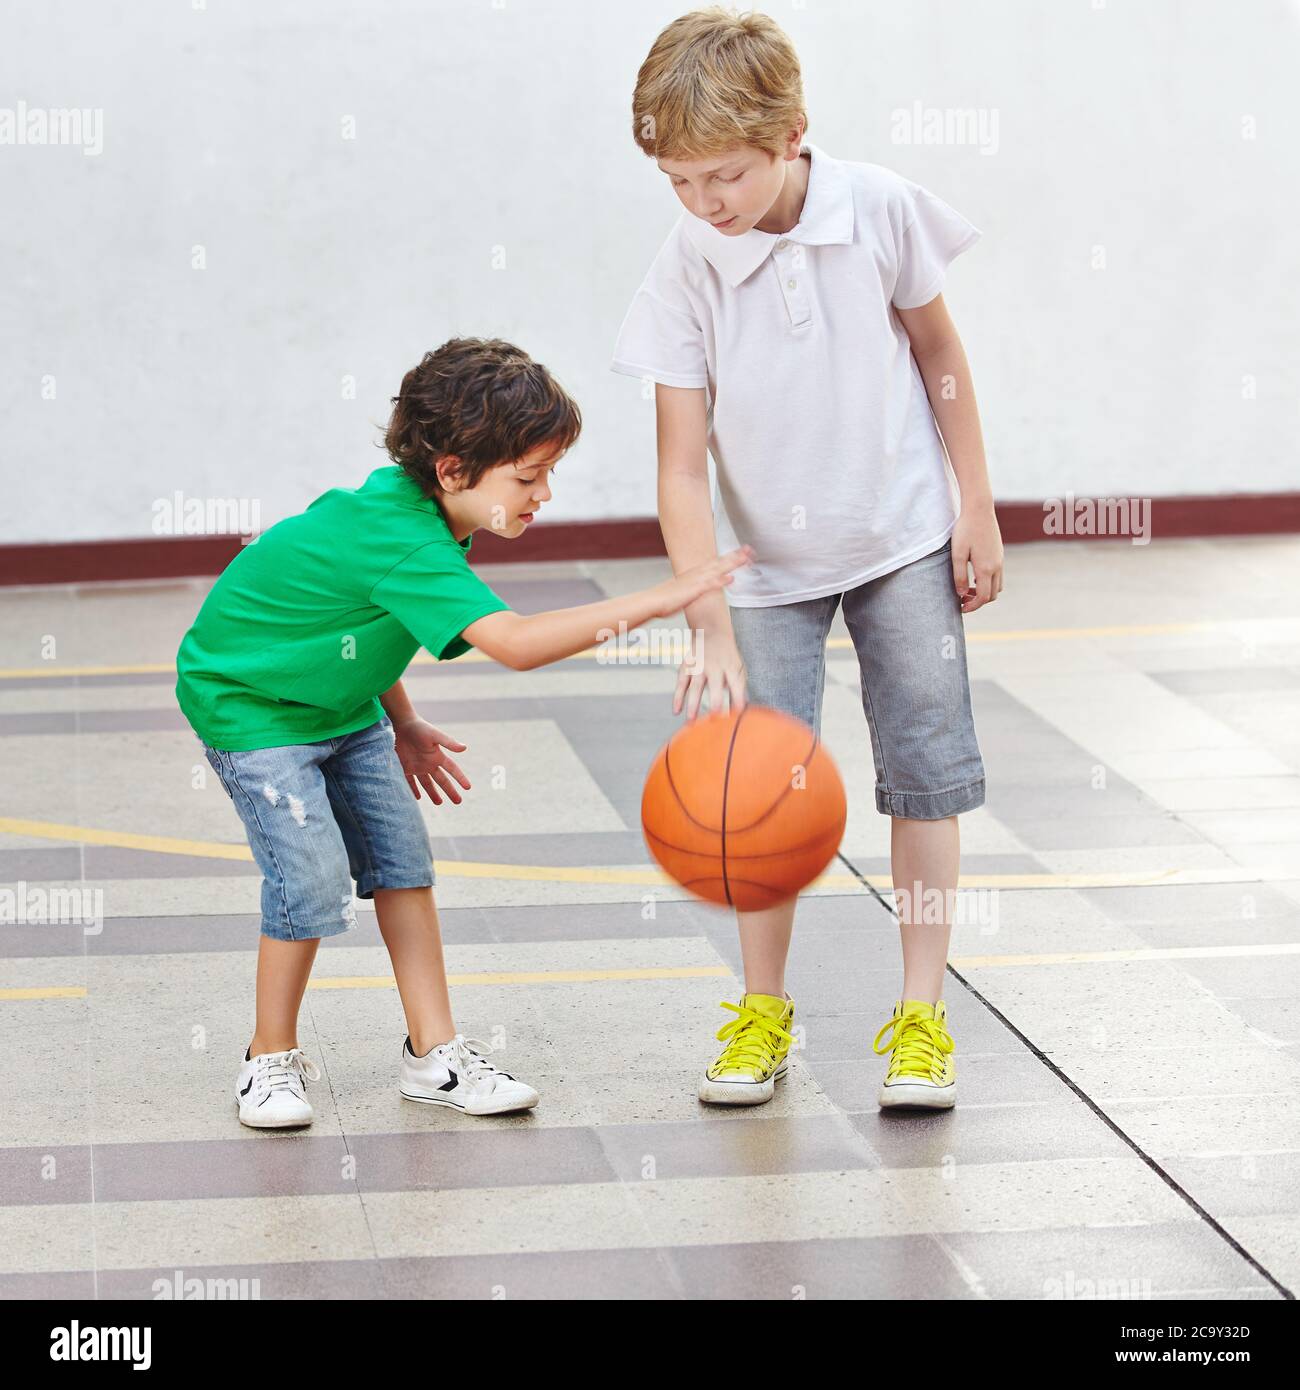 Two children play basketball together in the school playground Stock Photo